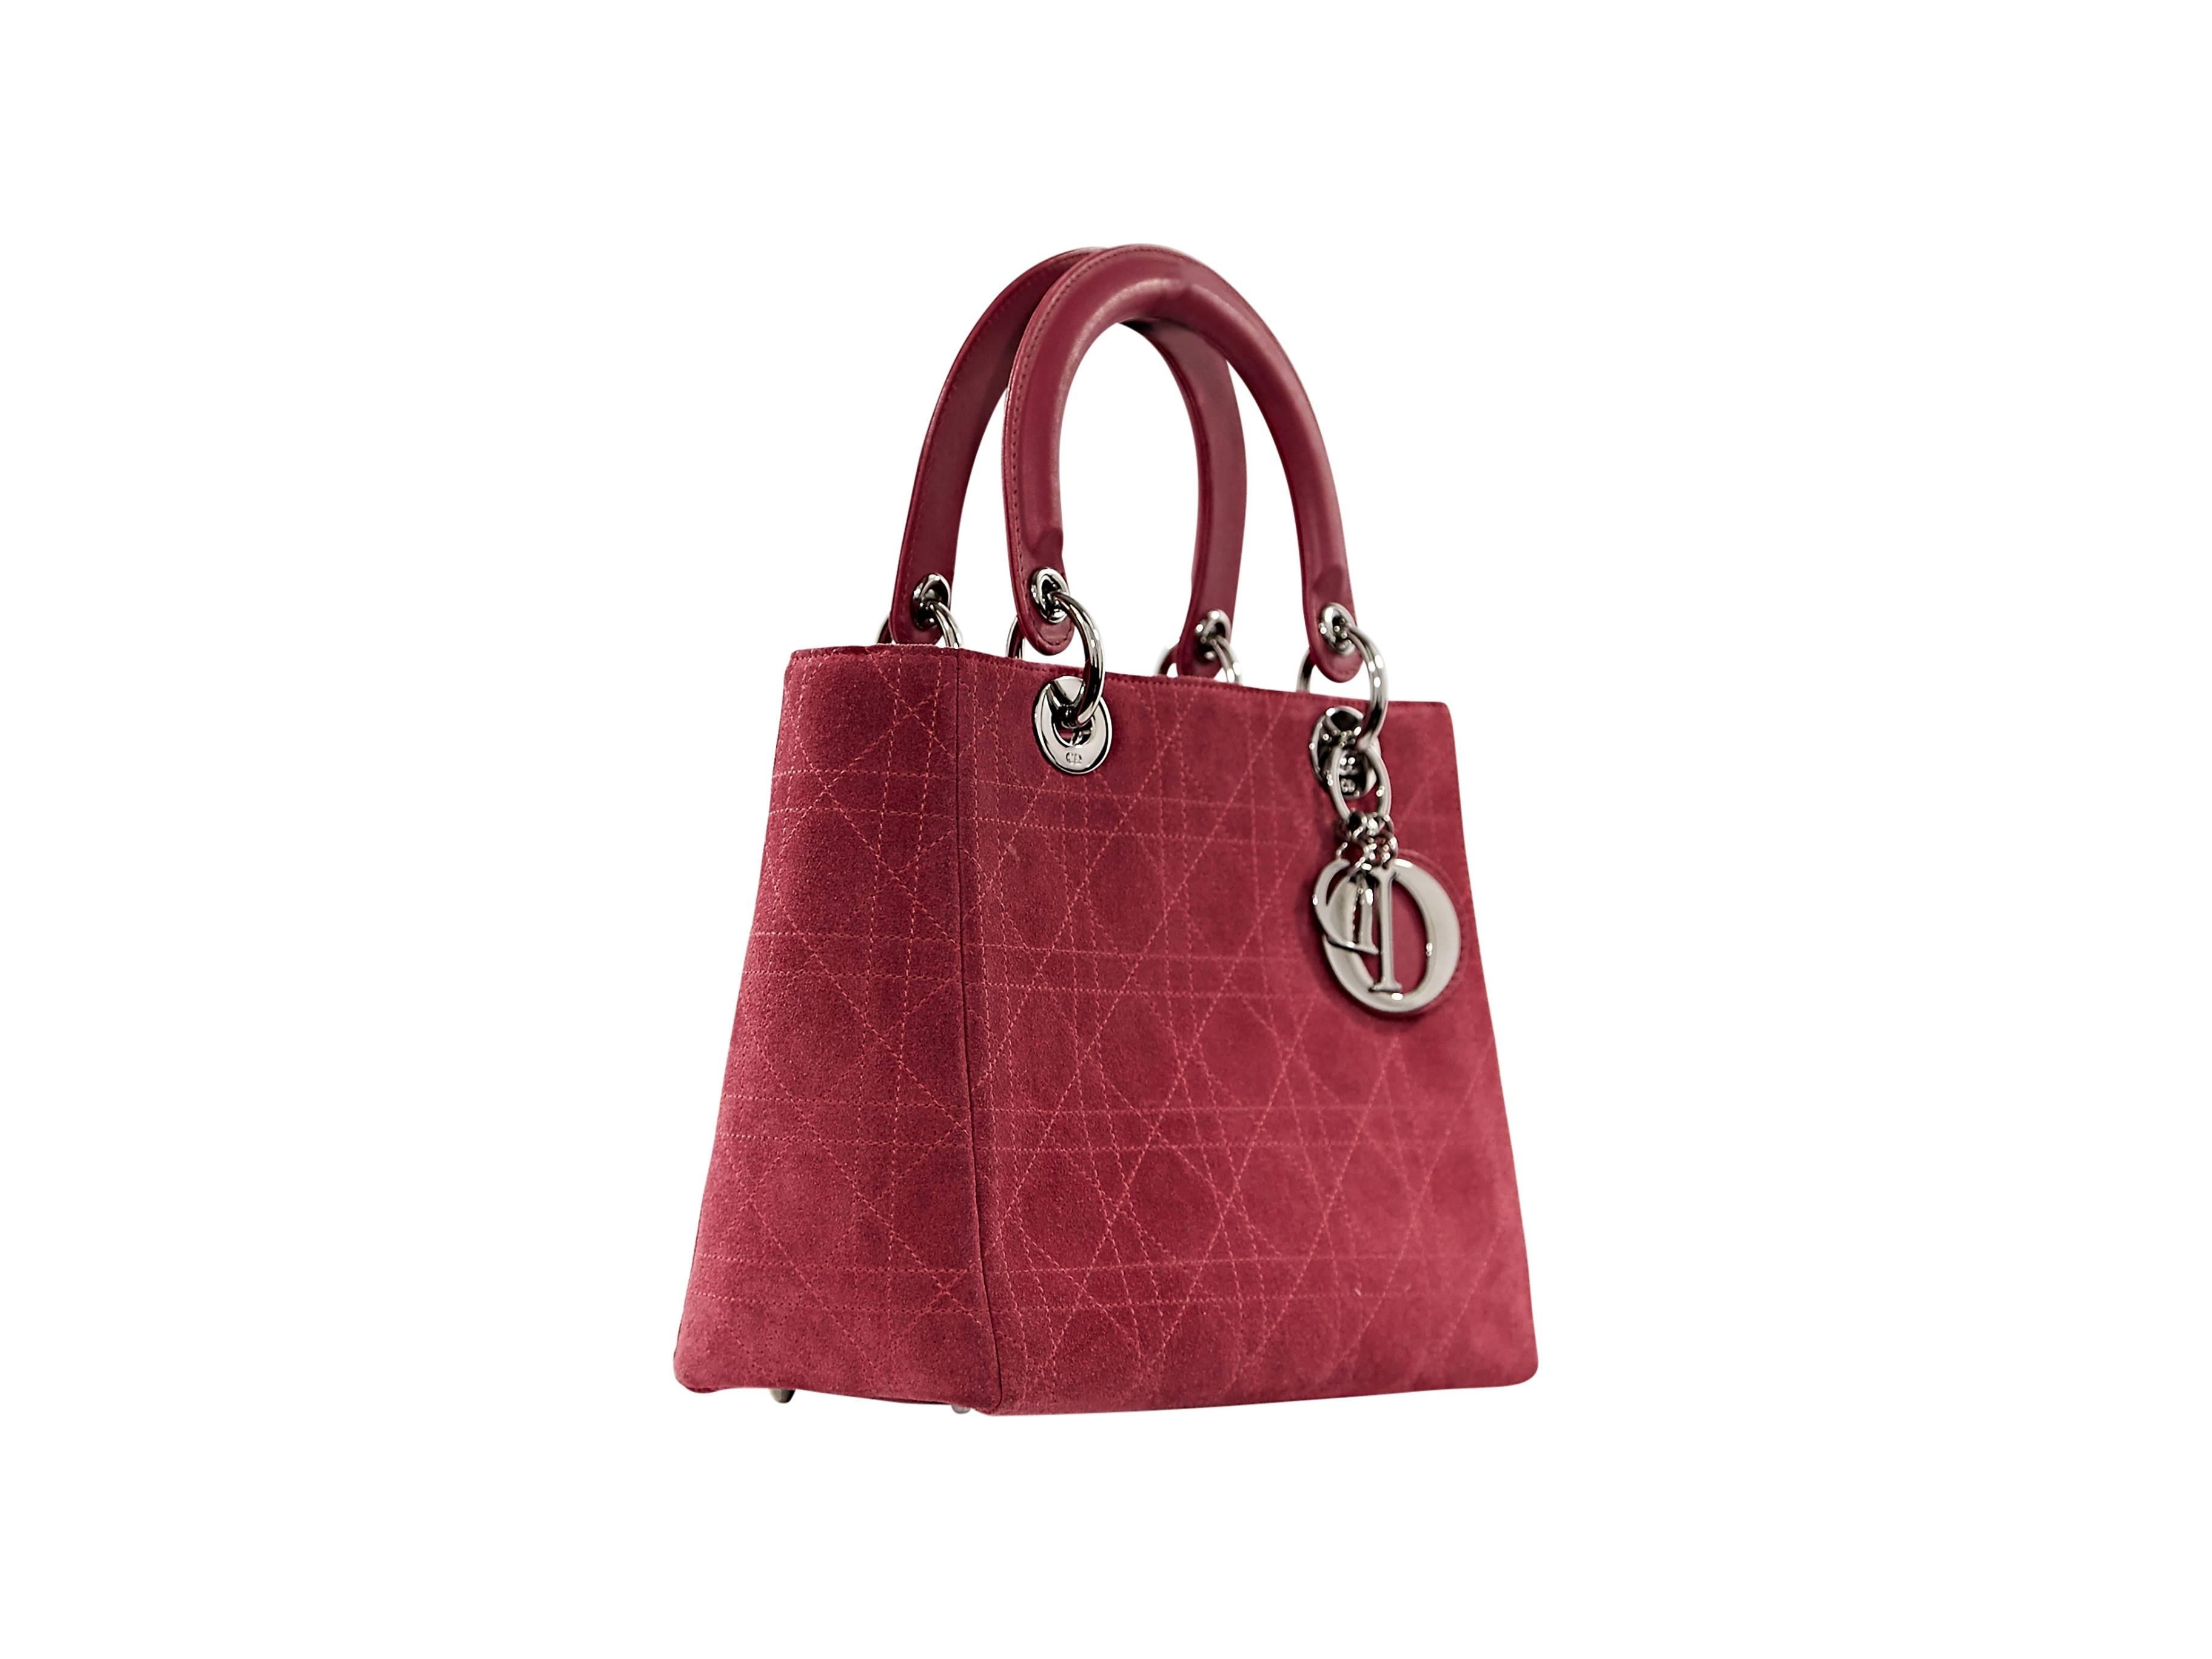 Iconic Lady Dior suede bag by Christian Dior. Top carry handles.  Removable shoulder strap.  Protective metal feet.  Silvertone hardware.